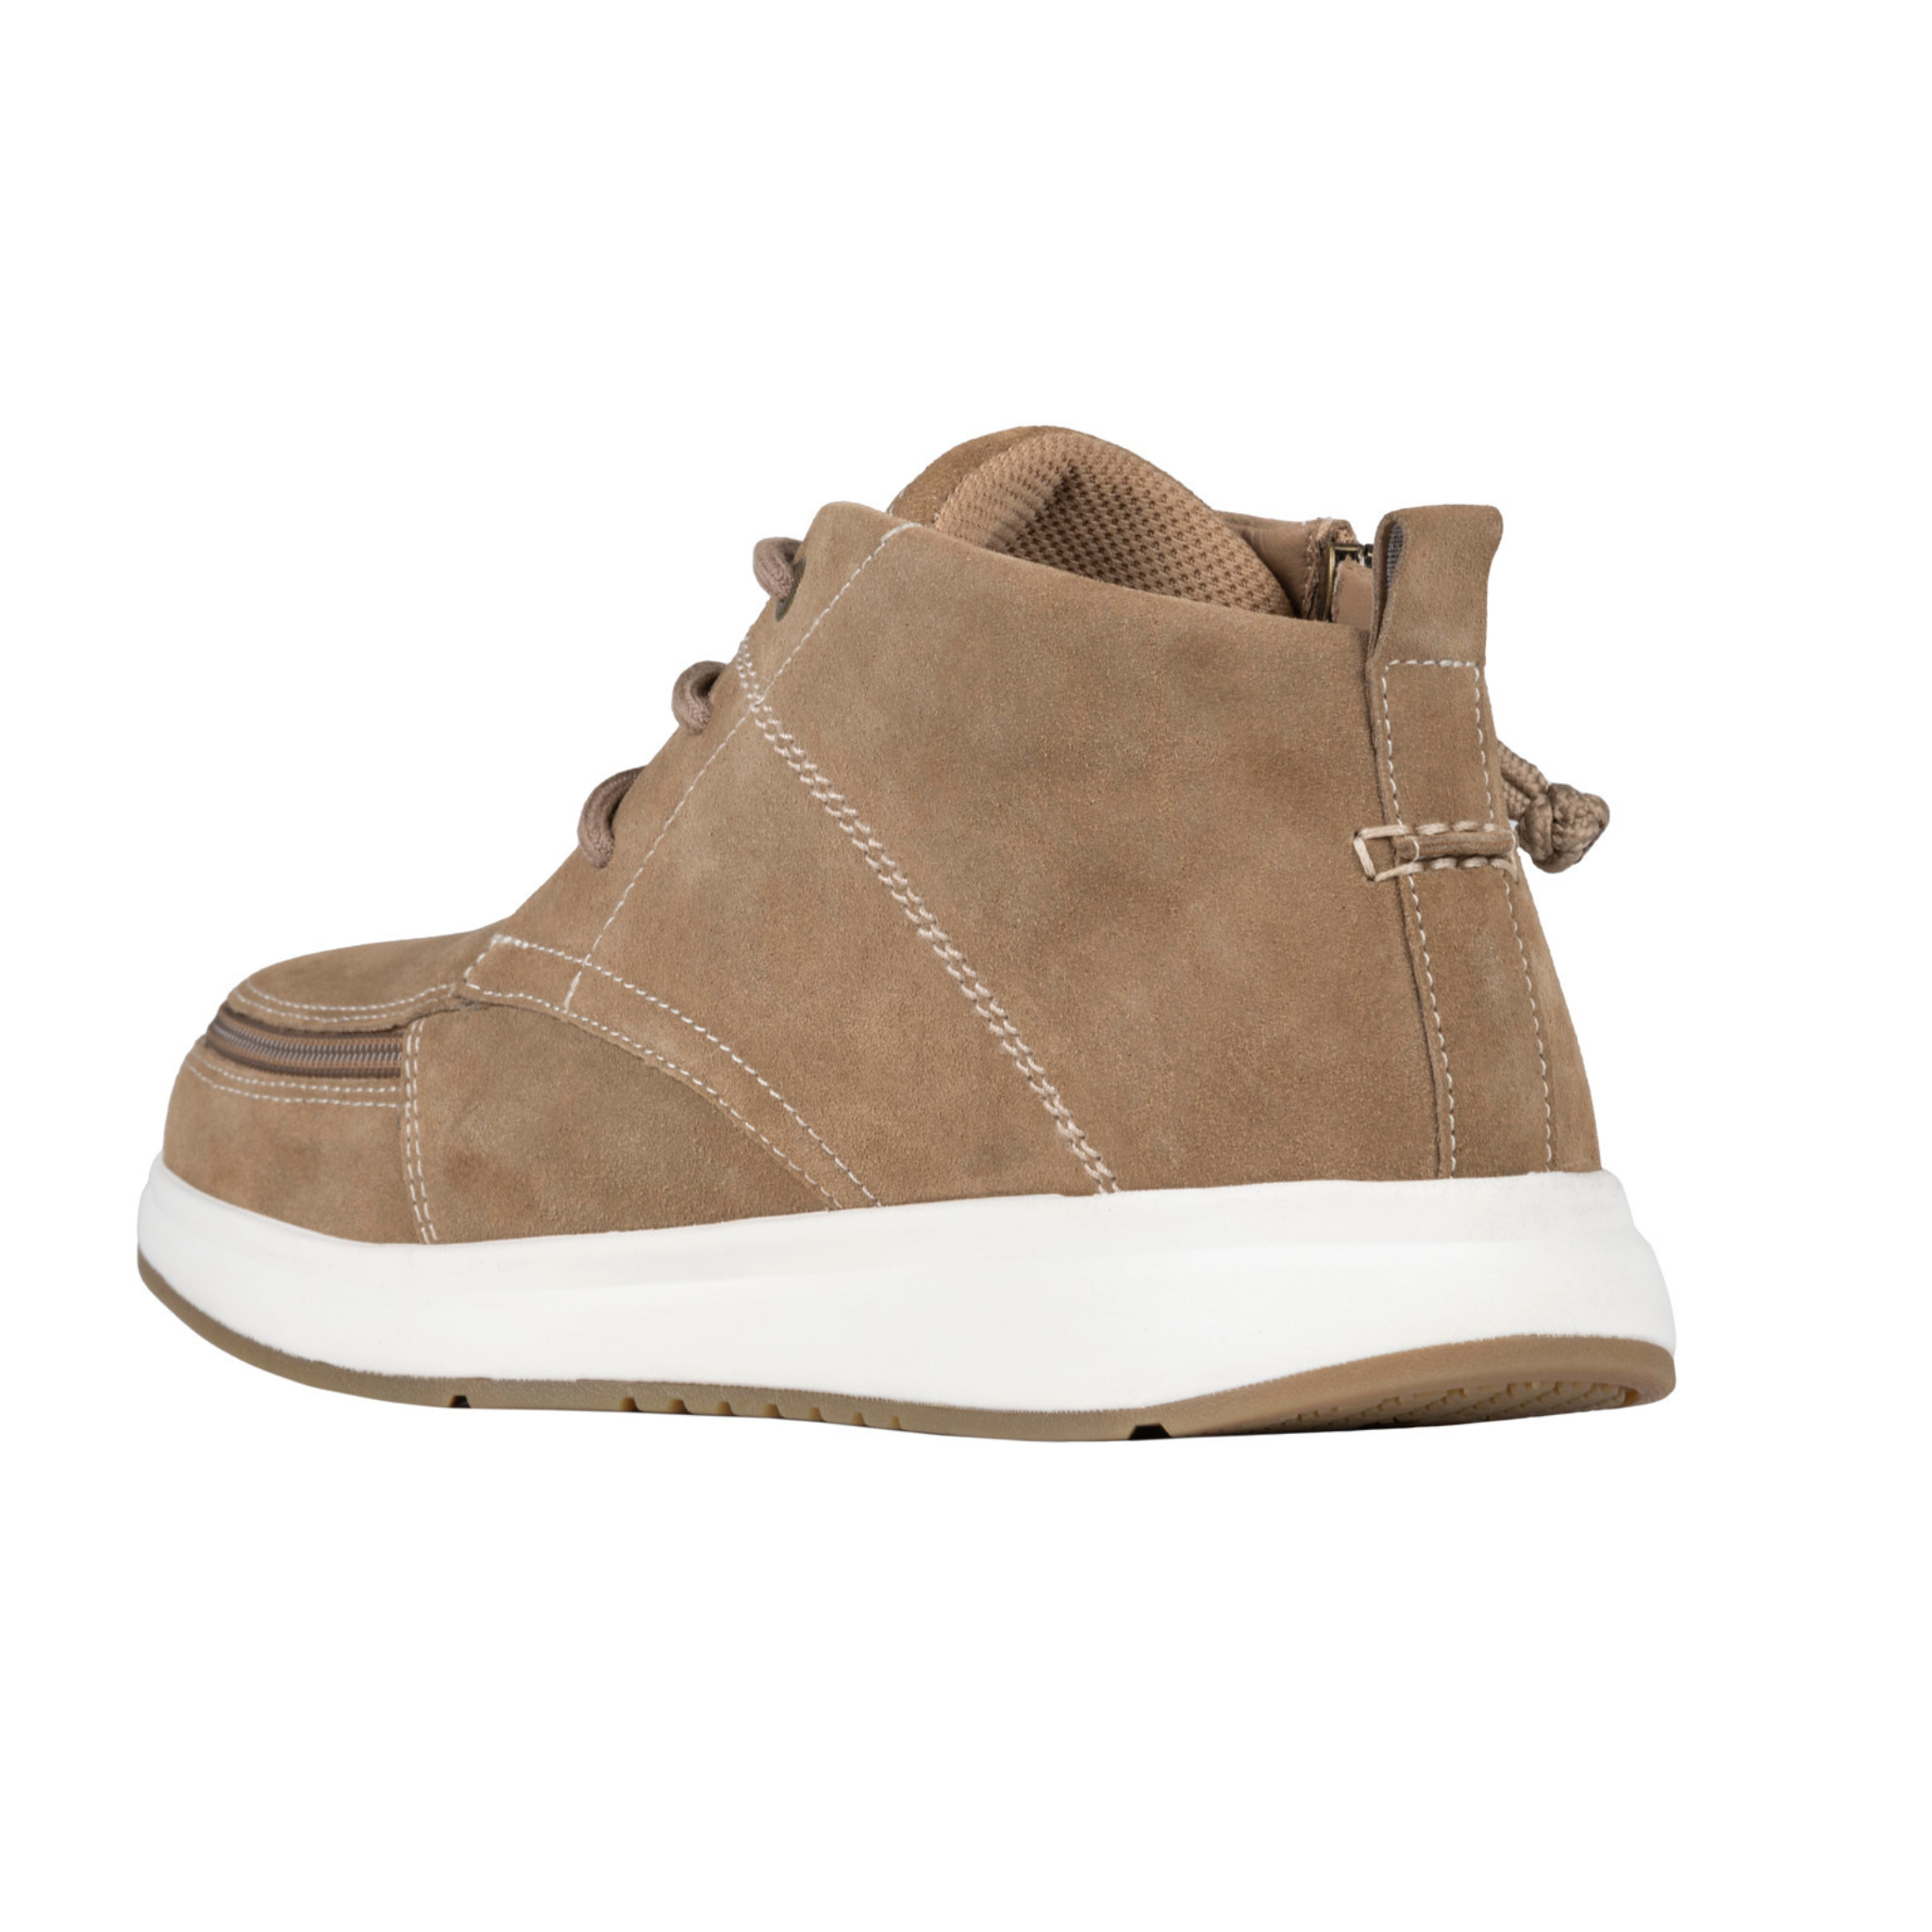 Billy Footwear (Mens) - Comfort Chukka Boots Suede - Sand